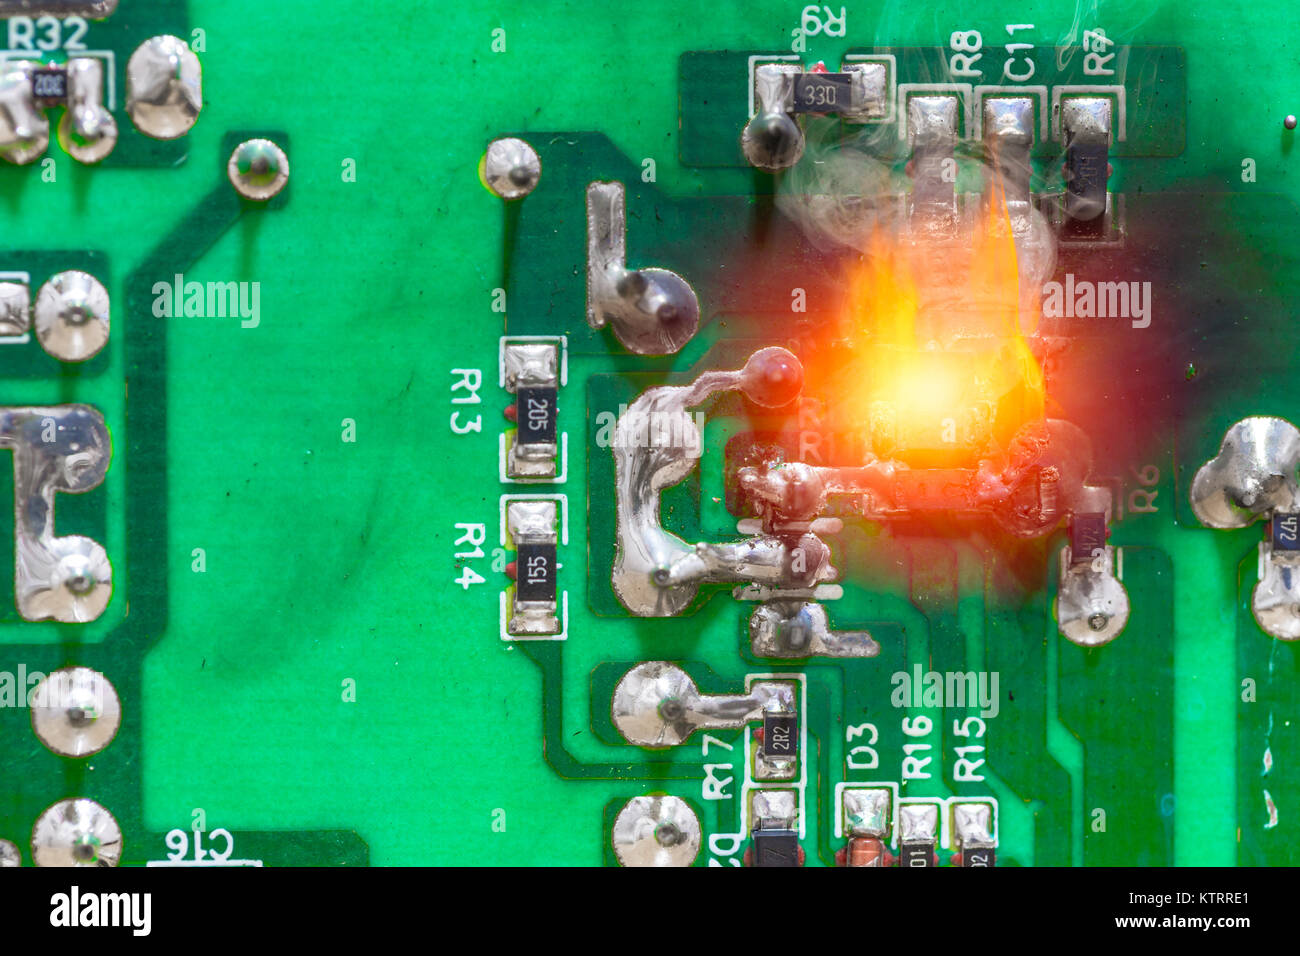 PCB circuit board electricity short circuit fire and burning Stock Photo